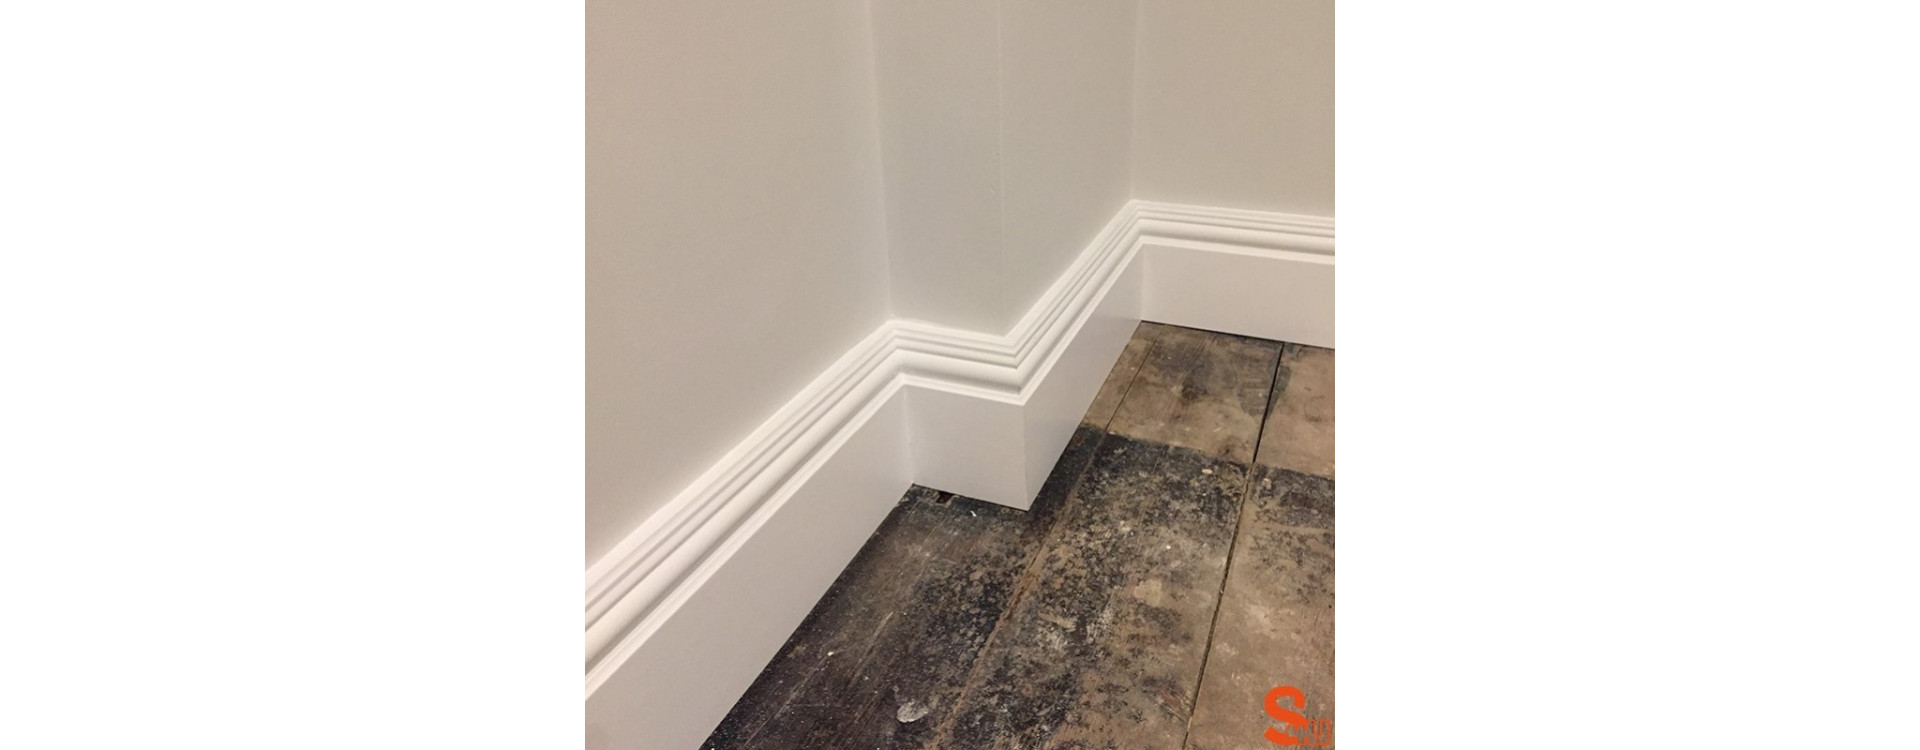 A guide on how to fit skirting boards - Wood Create